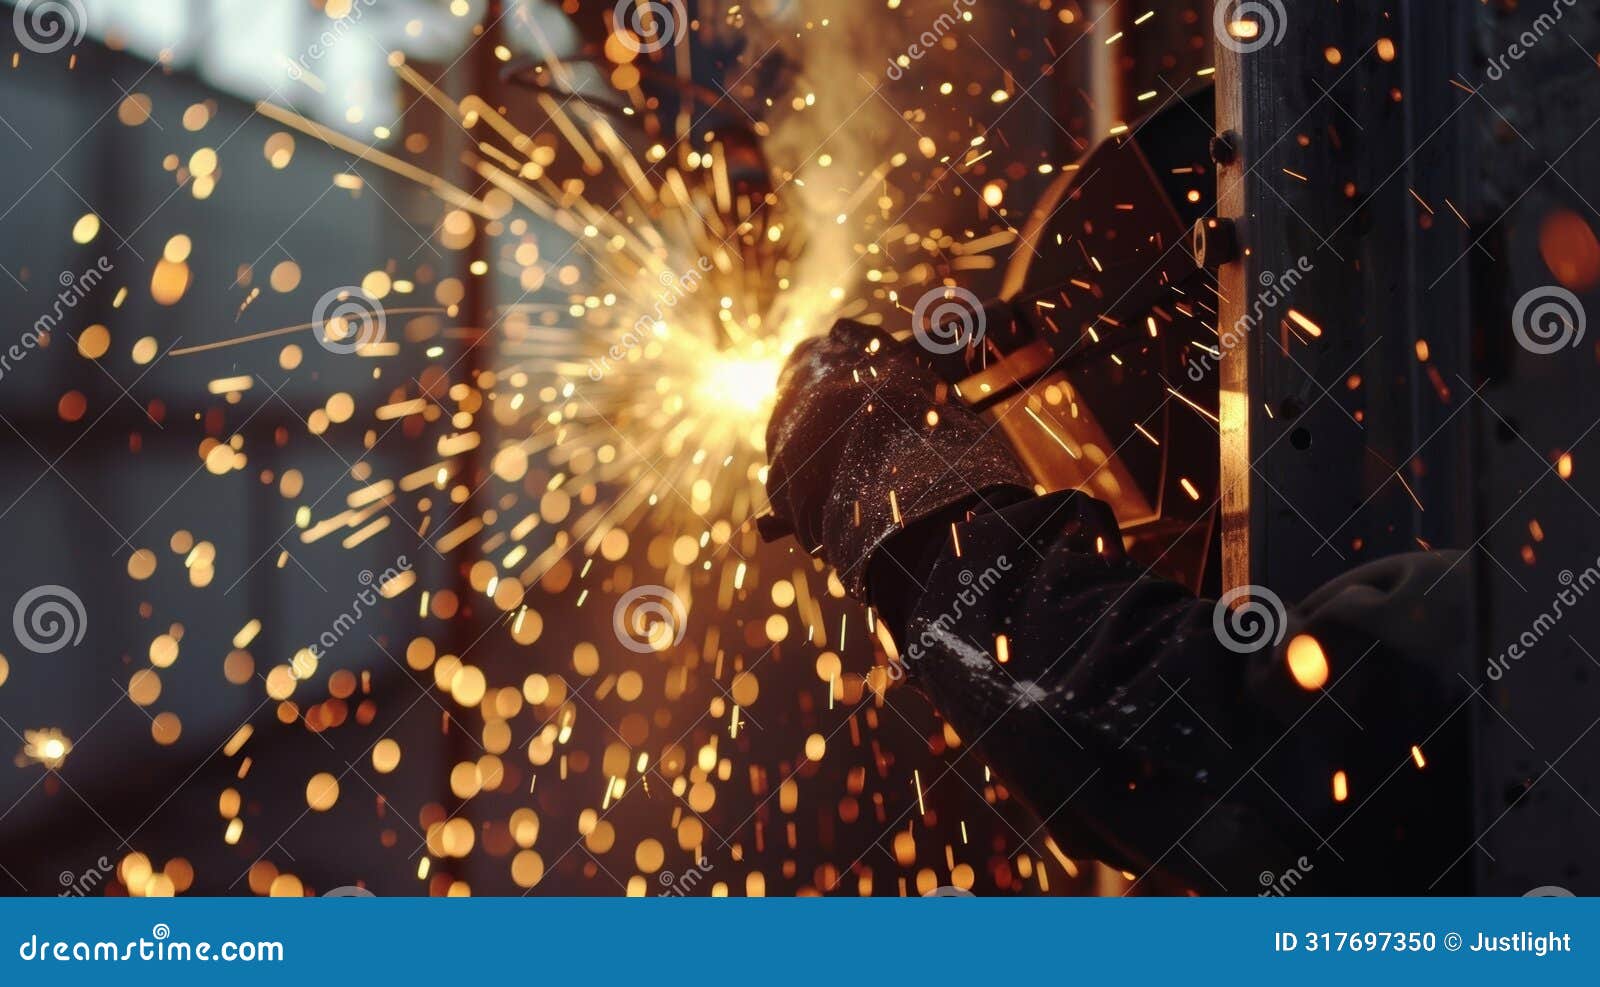 sparks fly as a worker welds a metal sign onto a building adding a final personalized touch to the construction project